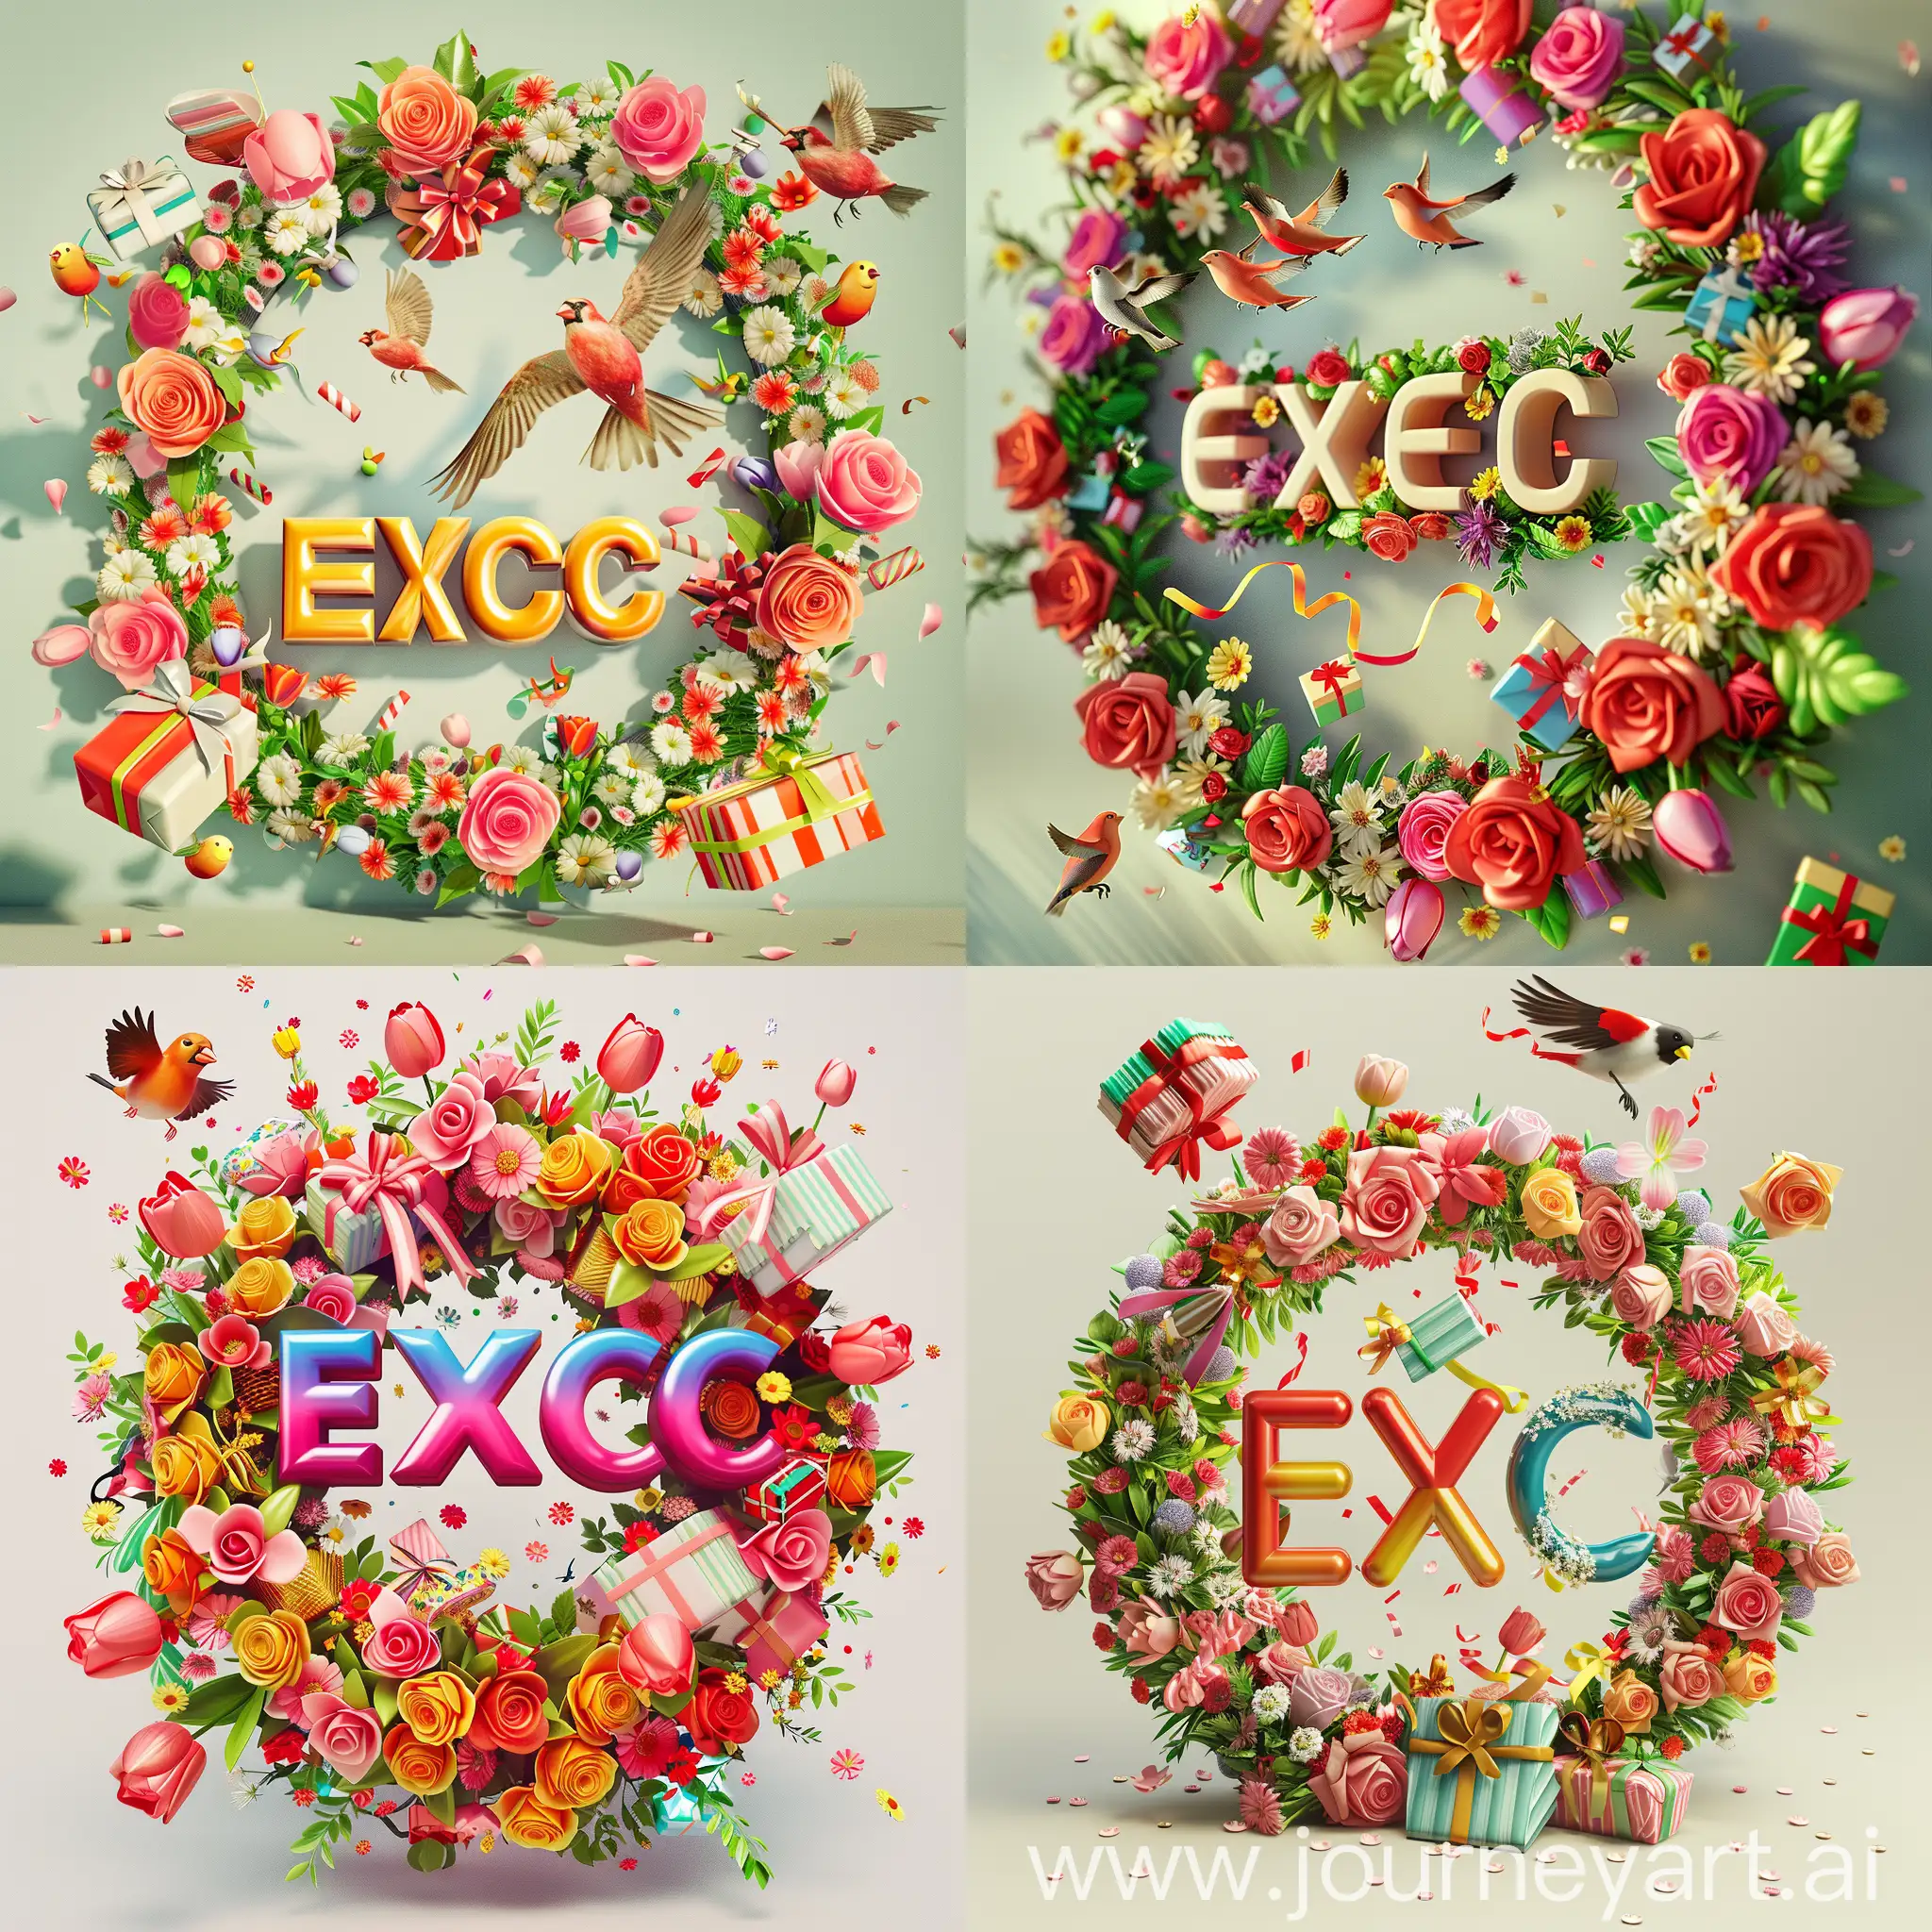 Dynamic-3D-Typography-Poster-with-Floral-Surroundings-and-Falling-Gifts